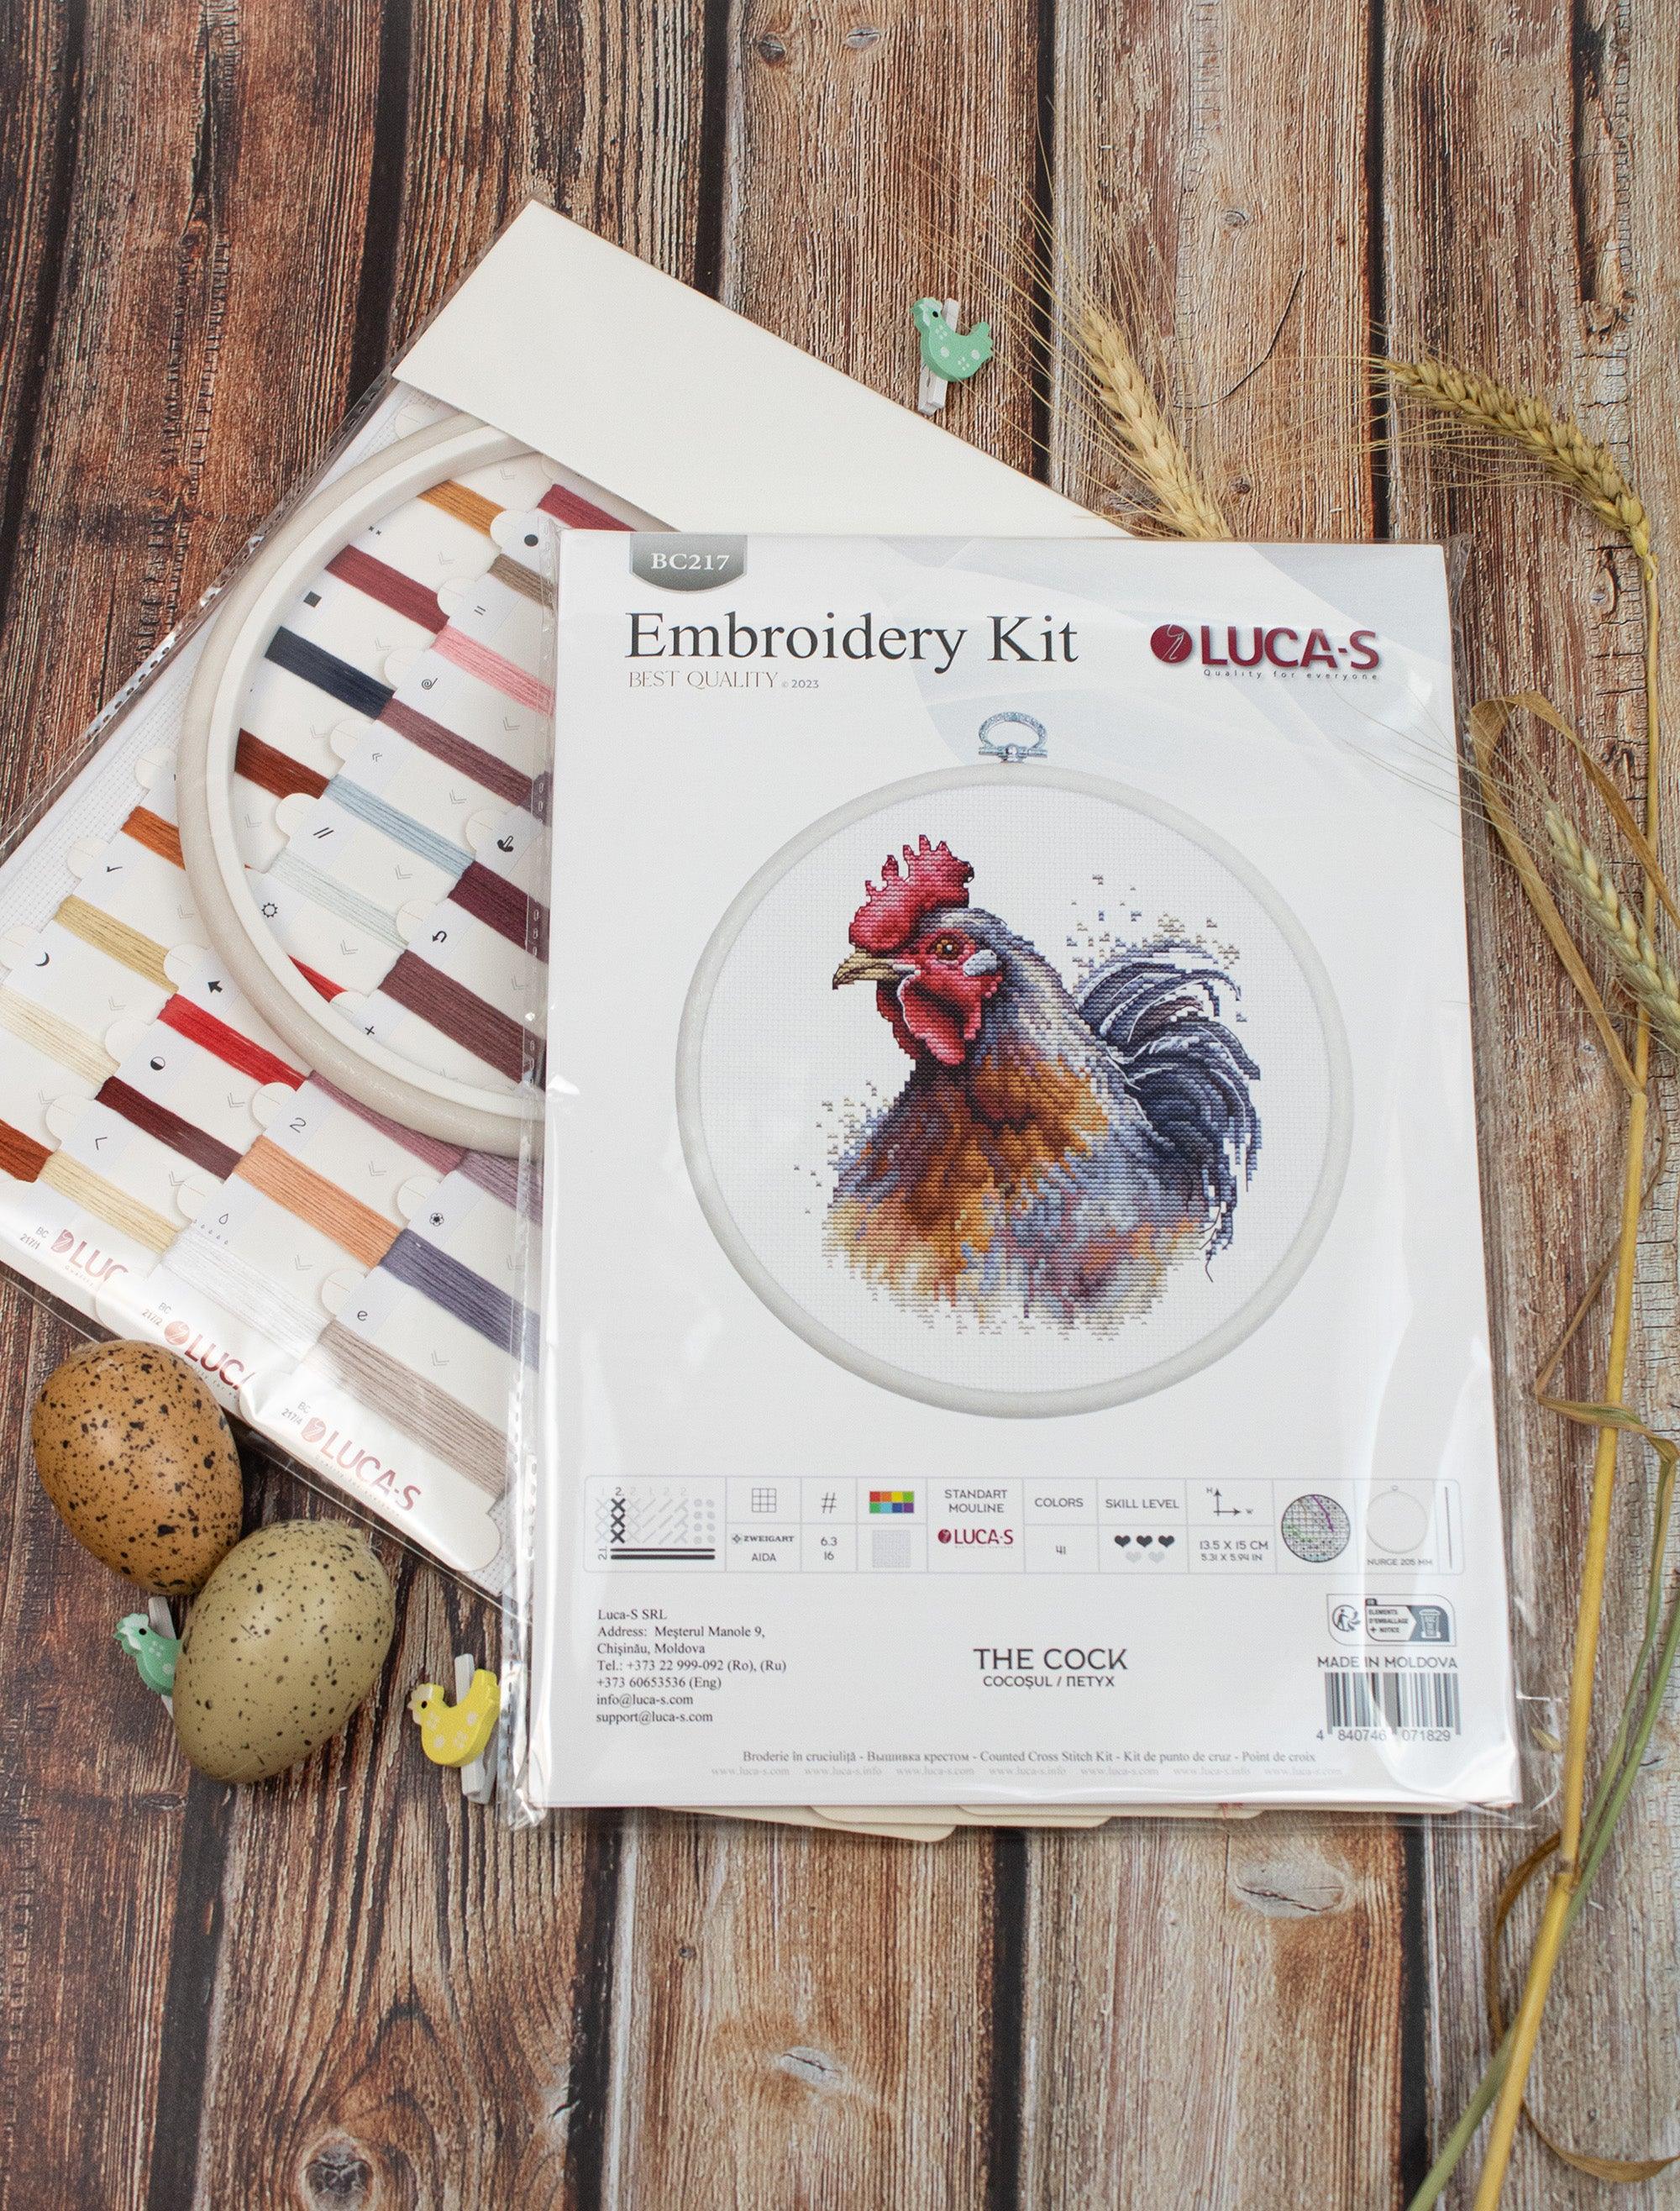 Cross Stitch Kit with Hoop Included Luca-S - The Cock, BC217 - Luca-S Cross Stitch Kits